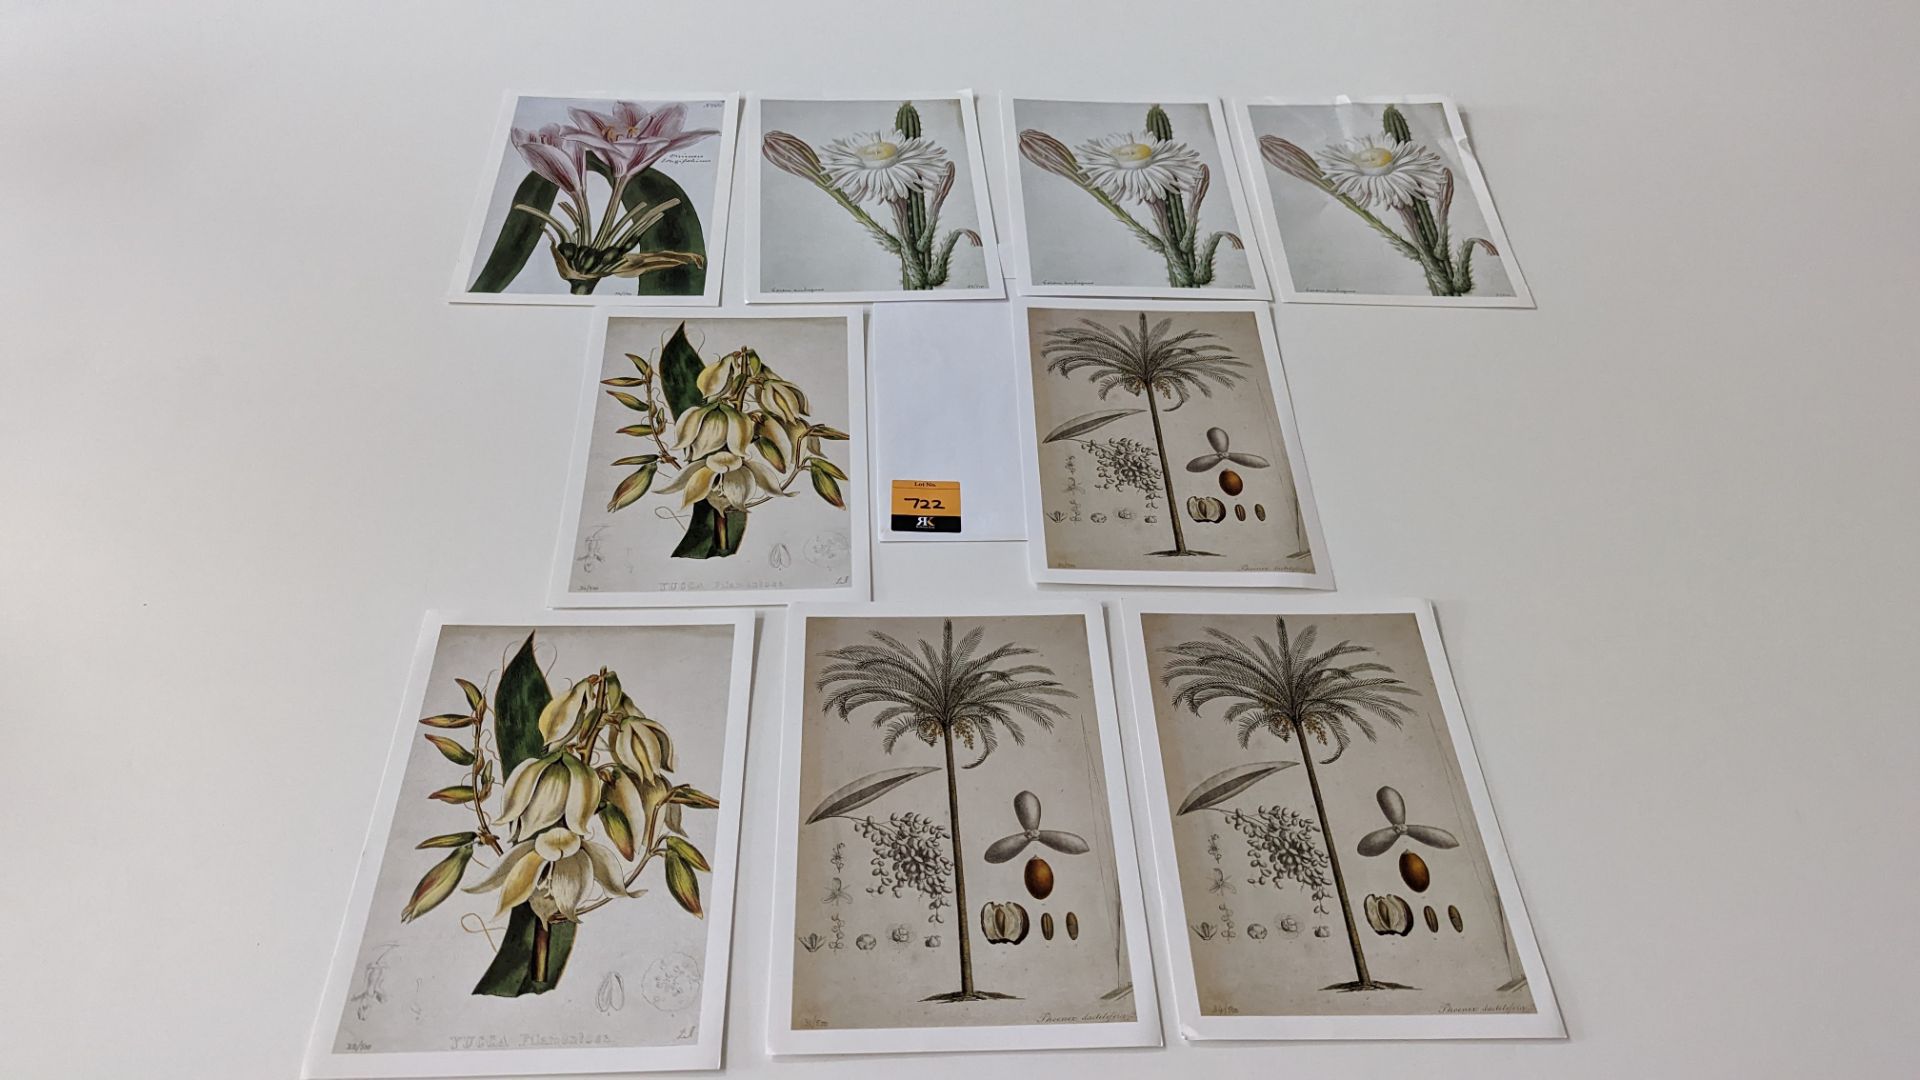 9 numbered limited edition botanical prints, each measuring 210mm x 295mm. Four different designs in